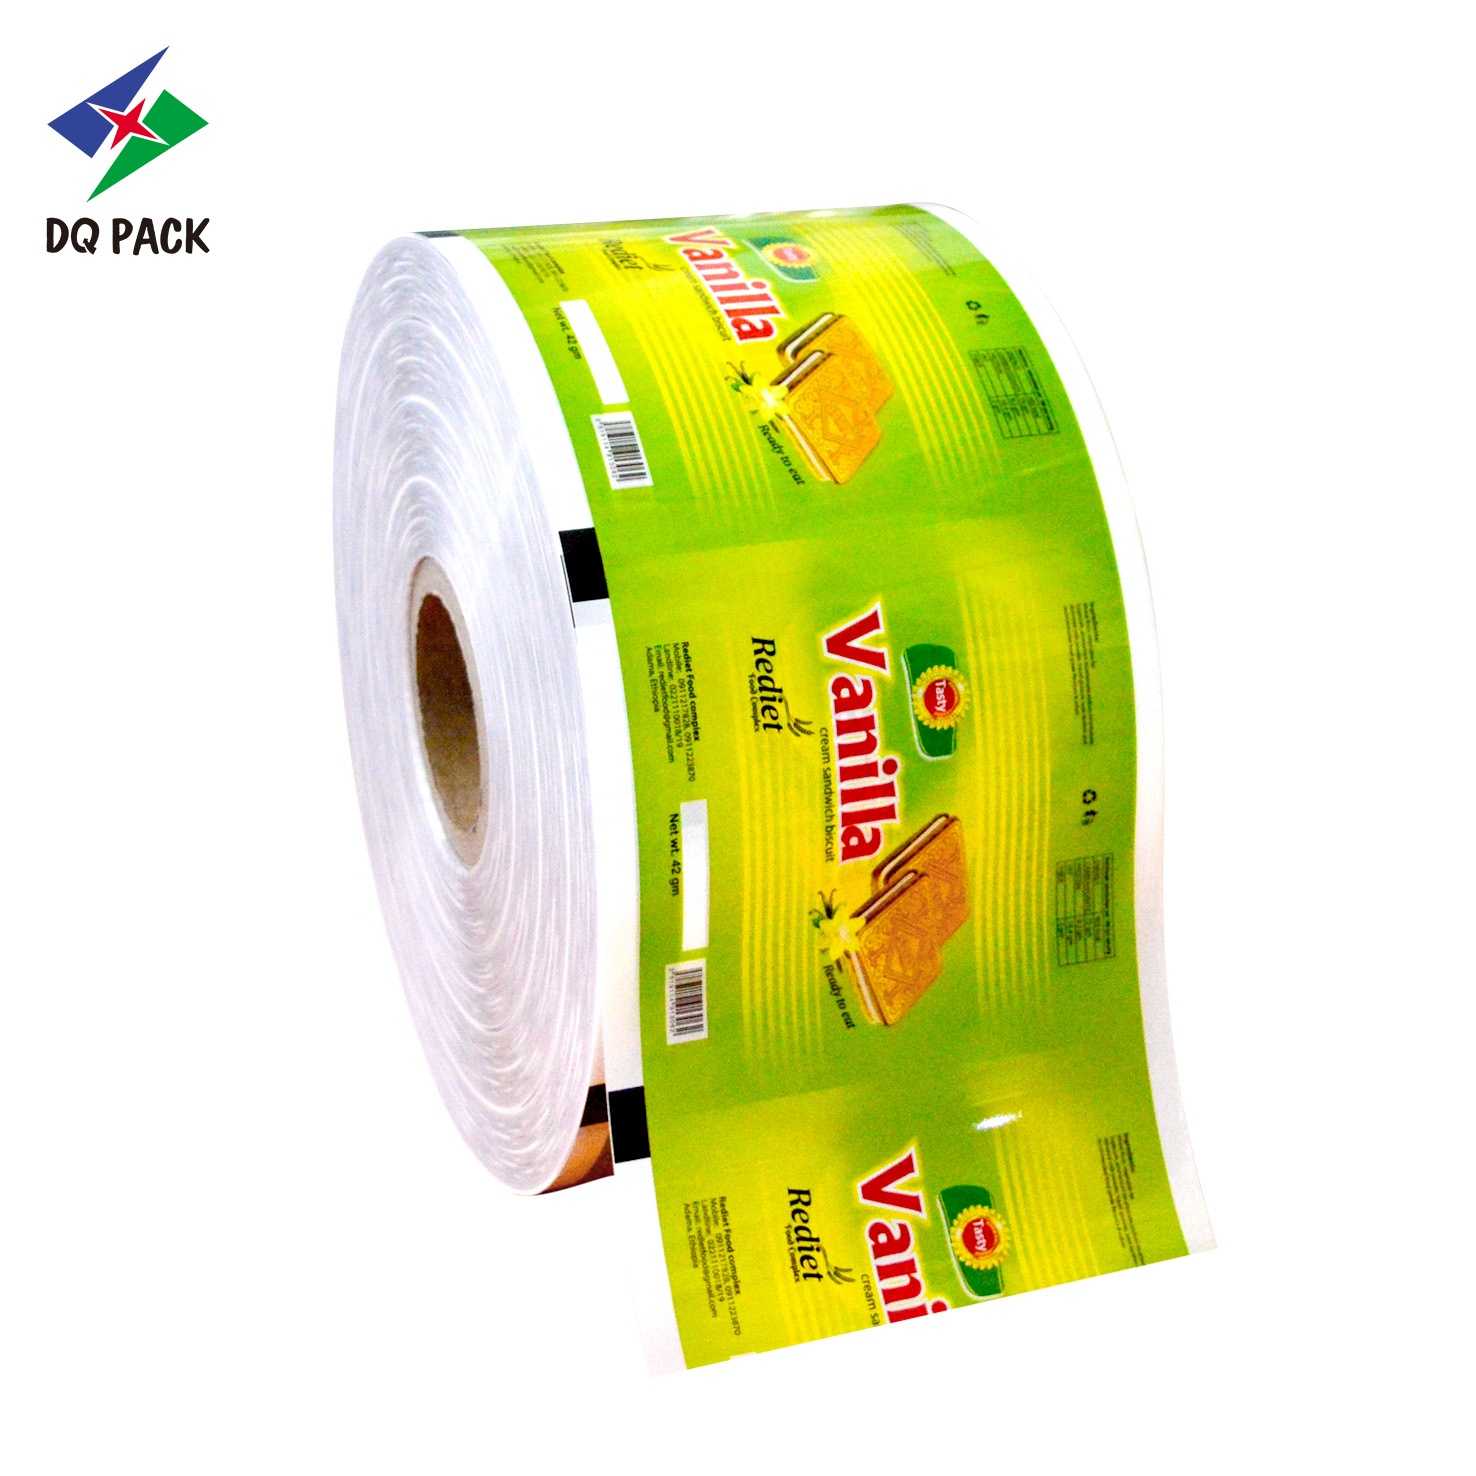 DQ PACK ethiopia vanilla biscuit packaging china printed cookie roll film suppliers